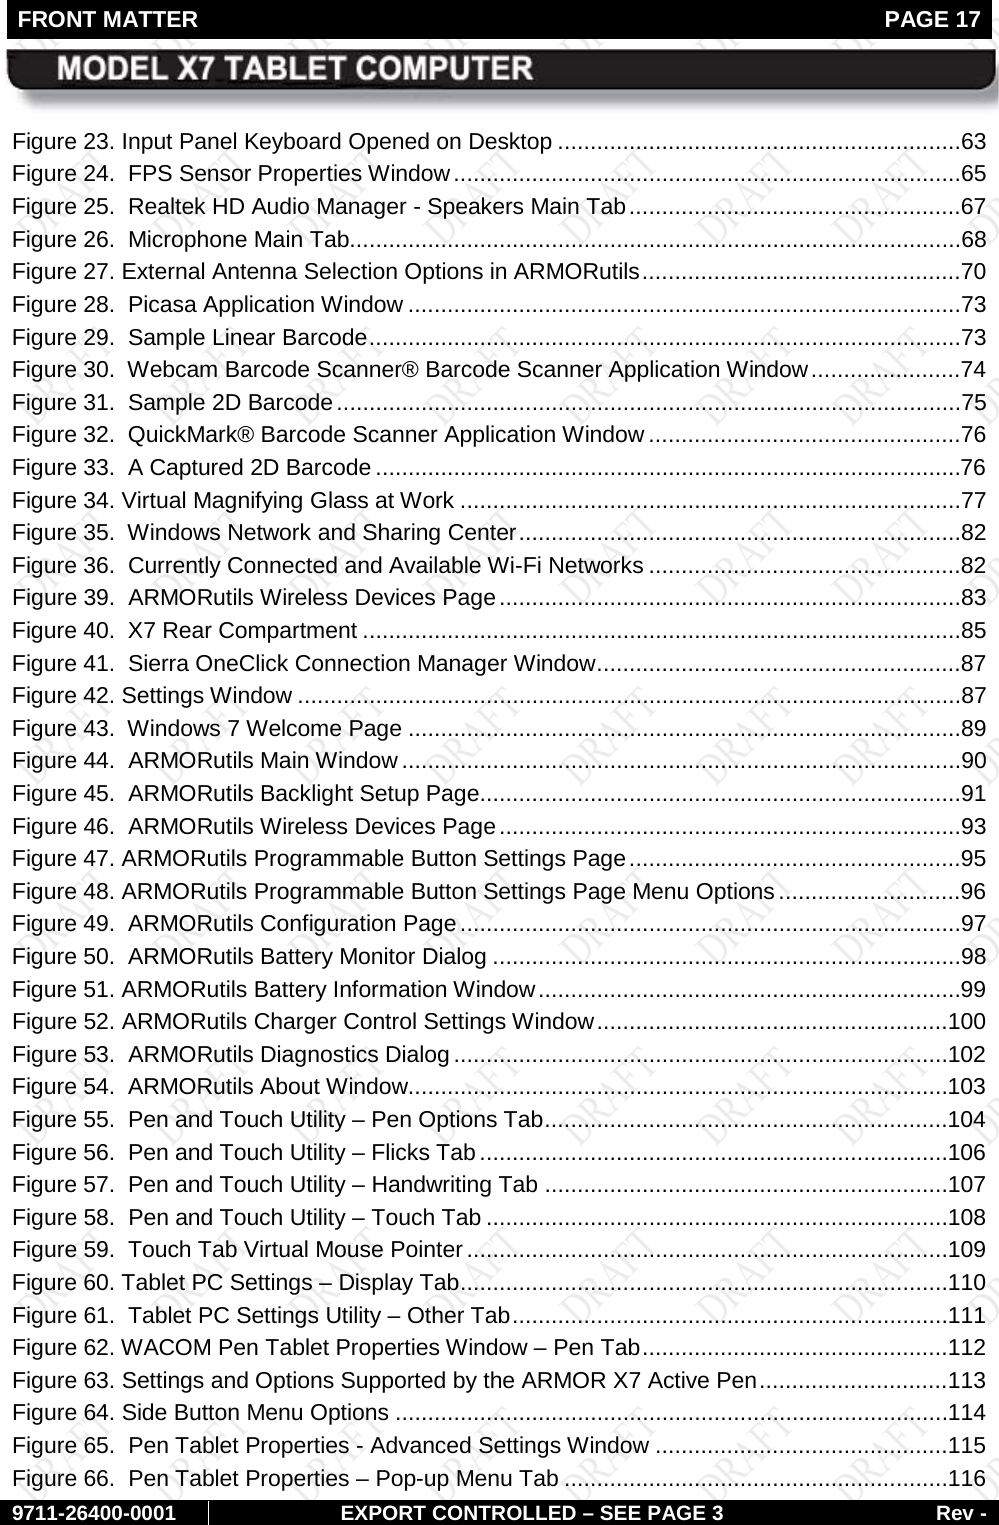 FRONT MATTER   PAGE 17        9711-26400-0001 EXPORT CONTROLLED – SEE PAGE 3 Rev - Figure 23. Input Panel Keyboard Opened on Desktop ..............................................................63 Figure 24.  FPS Sensor Properties Window ..............................................................................65 Figure 25.  Realtek HD Audio Manager - Speakers Main Tab ...................................................67 Figure 26.  Microphone Main Tab..............................................................................................68 Figure 27. External Antenna Selection Options in ARMORutils .................................................70 Figure 28.  Picasa Application Window .....................................................................................73 Figure 29.  Sample Linear Barcode ...........................................................................................73 Figure 30.  Webcam Barcode Scanner® Barcode Scanner Application Window .......................74 Figure 31.  Sample 2D Barcode ................................................................................................75 Figure 32.  QuickMark® Barcode Scanner Application Window ................................................76 Figure 33.  A Captured 2D Barcode ..........................................................................................76 Figure 34. Virtual Magnifying Glass at Work .............................................................................77 Figure 35.  Windows Network and Sharing Center ....................................................................82 Figure 36.  Currently Connected and Available Wi-Fi Networks ................................................82 Figure 39.  ARMORutils Wireless Devices Page .......................................................................83 Figure 40.  X7 Rear Compartment ............................................................................................85 Figure 41.  Sierra OneClick Connection Manager Window ........................................................87 Figure 42. Settings Window ......................................................................................................87 Figure 43.  Windows 7 Welcome Page .....................................................................................89 Figure 44.  ARMORutils Main Window ......................................................................................90 Figure 45.  ARMORutils Backlight Setup Page..........................................................................91 Figure 46.  ARMORutils Wireless Devices Page .......................................................................93 Figure 47. ARMORutils Programmable Button Settings Page ...................................................95 Figure 48. ARMORutils Programmable Button Settings Page Menu Options ............................96 Figure 49.  ARMORutils Configuration Page .............................................................................97 Figure 50.  ARMORutils Battery Monitor Dialog ........................................................................98 Figure 51. ARMORutils Battery Information Window .................................................................99 Figure 52. ARMORutils Charger Control Settings Window ...................................................... 100 Figure 53.  ARMORutils Diagnostics Dialog ............................................................................ 102 Figure 54.  ARMORutils About Window................................................................................... 103 Figure 55.  Pen and Touch Utility – Pen Options Tab .............................................................. 104 Figure 56.  Pen and Touch Utility – Flicks Tab ........................................................................ 106 Figure 57.  Pen and Touch Utility – Handwriting Tab .............................................................. 107 Figure 58.  Pen and Touch Utility – Touch Tab ....................................................................... 108 Figure 59.  Touch Tab Virtual Mouse Pointer .......................................................................... 109 Figure 60. Tablet PC Settings – Display Tab ........................................................................... 110 Figure 61.  Tablet PC Settings Utility – Other Tab ................................................................... 111 Figure 62. WACOM Pen Tablet Properties Window – Pen Tab ............................................... 112 Figure 63. Settings and Options Supported by the ARMOR X7 Active Pen ............................. 113 Figure 64. Side Button Menu Options ..................................................................................... 114 Figure 65.  Pen Tablet Properties - Advanced Settings Window ............................................. 115 Figure 66.  Pen Tablet Properties – Pop-up Menu Tab ........................................................... 116 